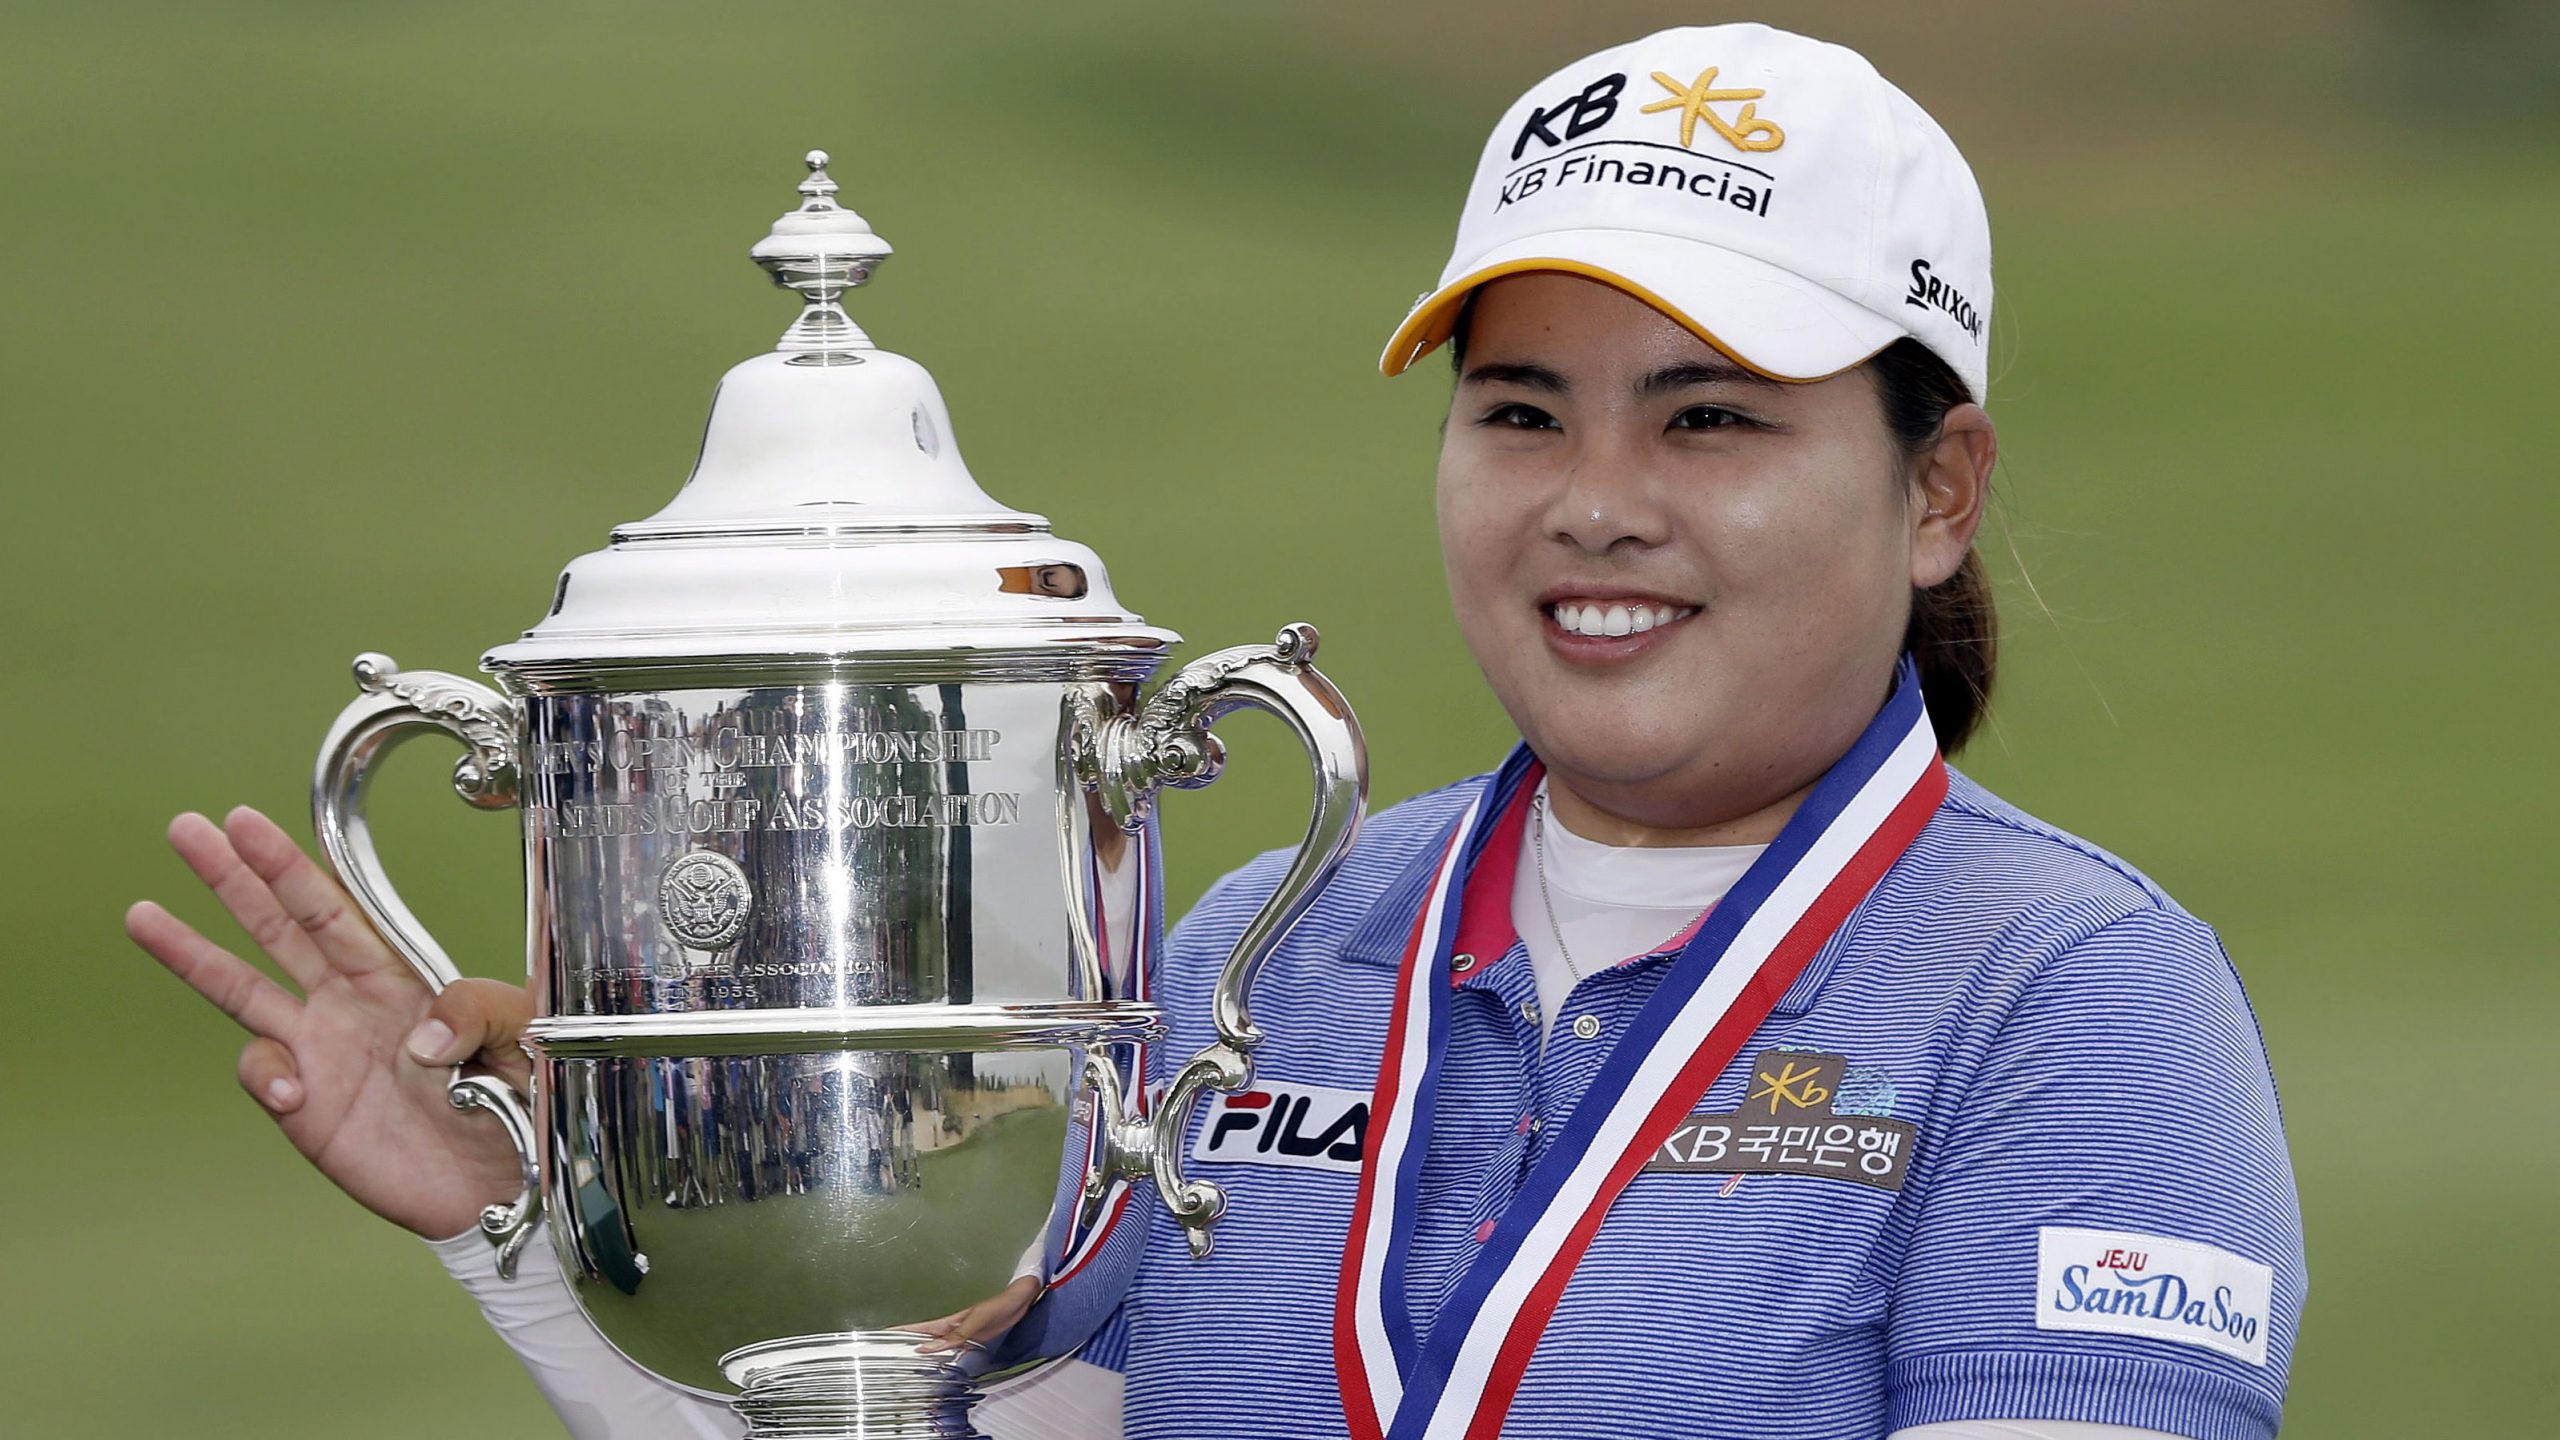 Park looks to win fourth straight major